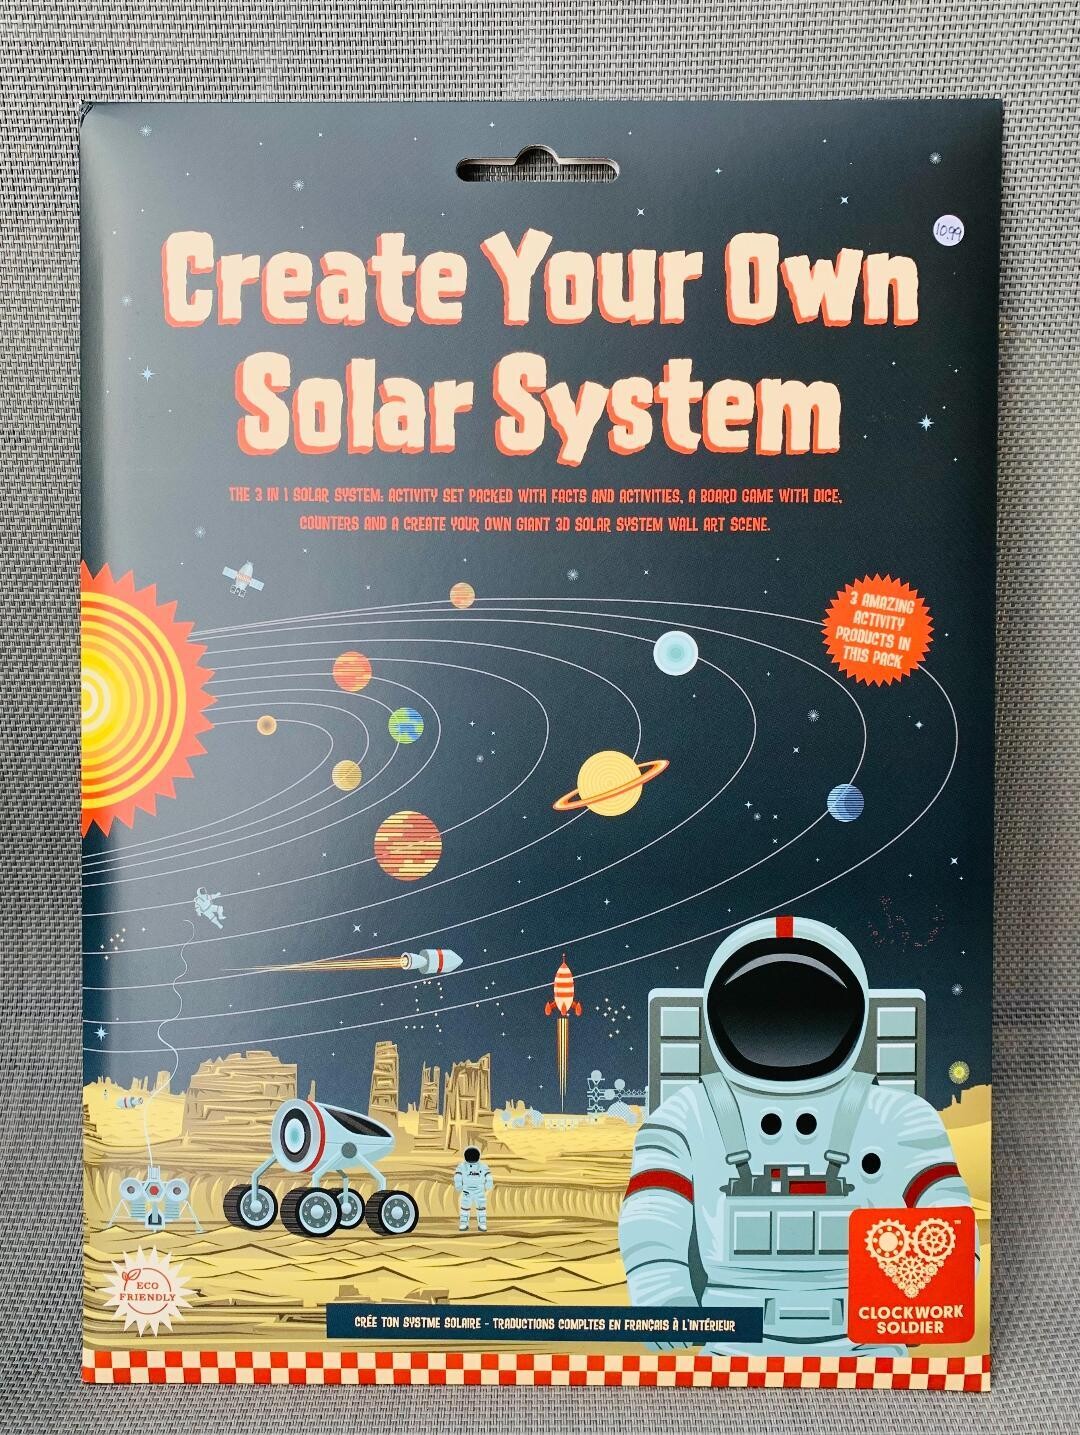 'Create Your Own Solar System'